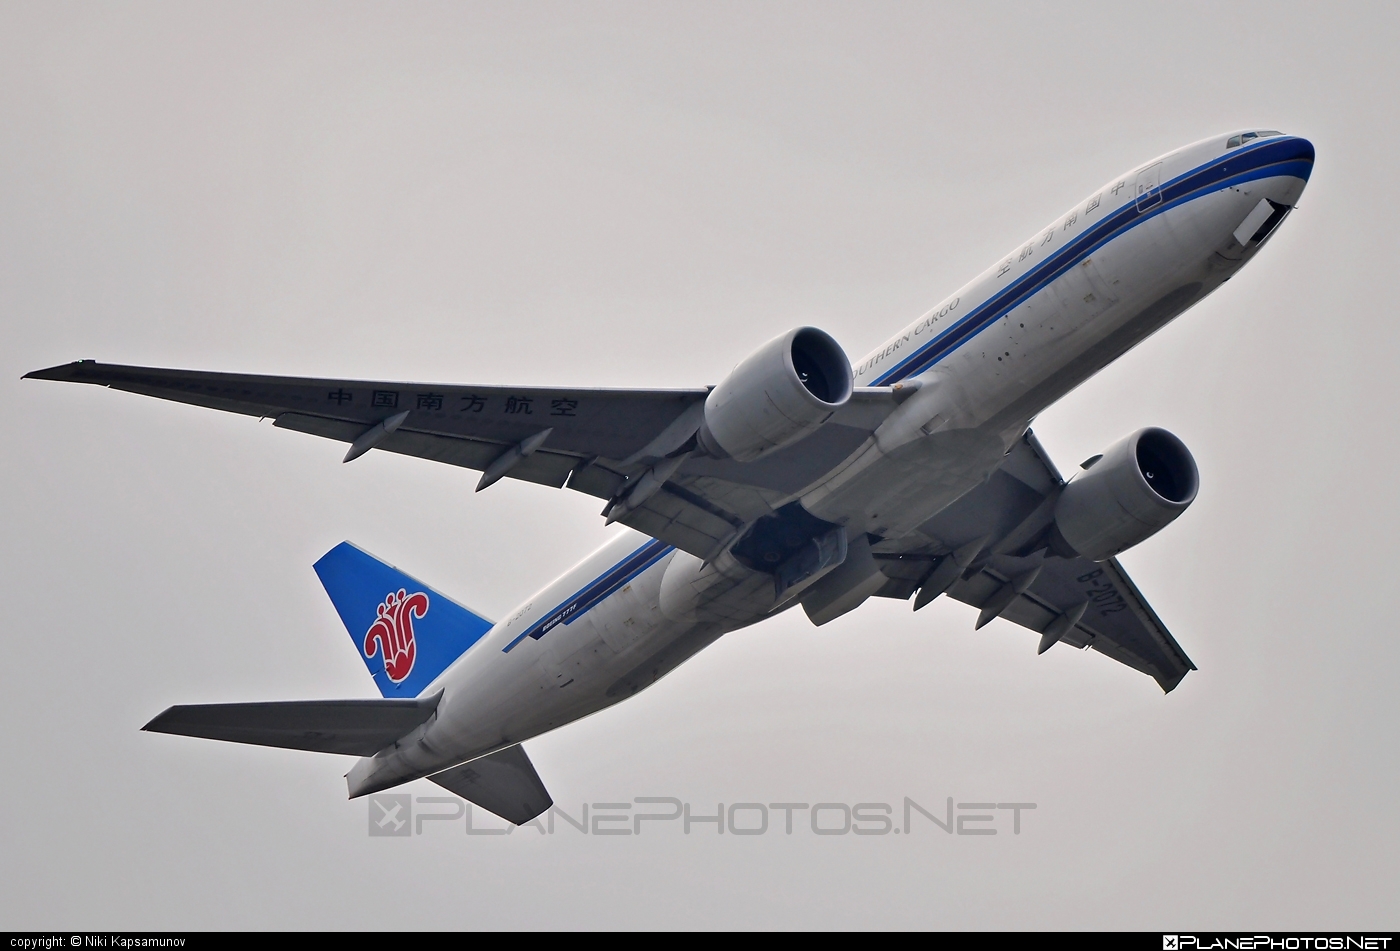 Boeing 777F - B-2072 operated by China Southern Cargo #b777 #b777f #b777freighter #boeing #boeing777 #tripleseven